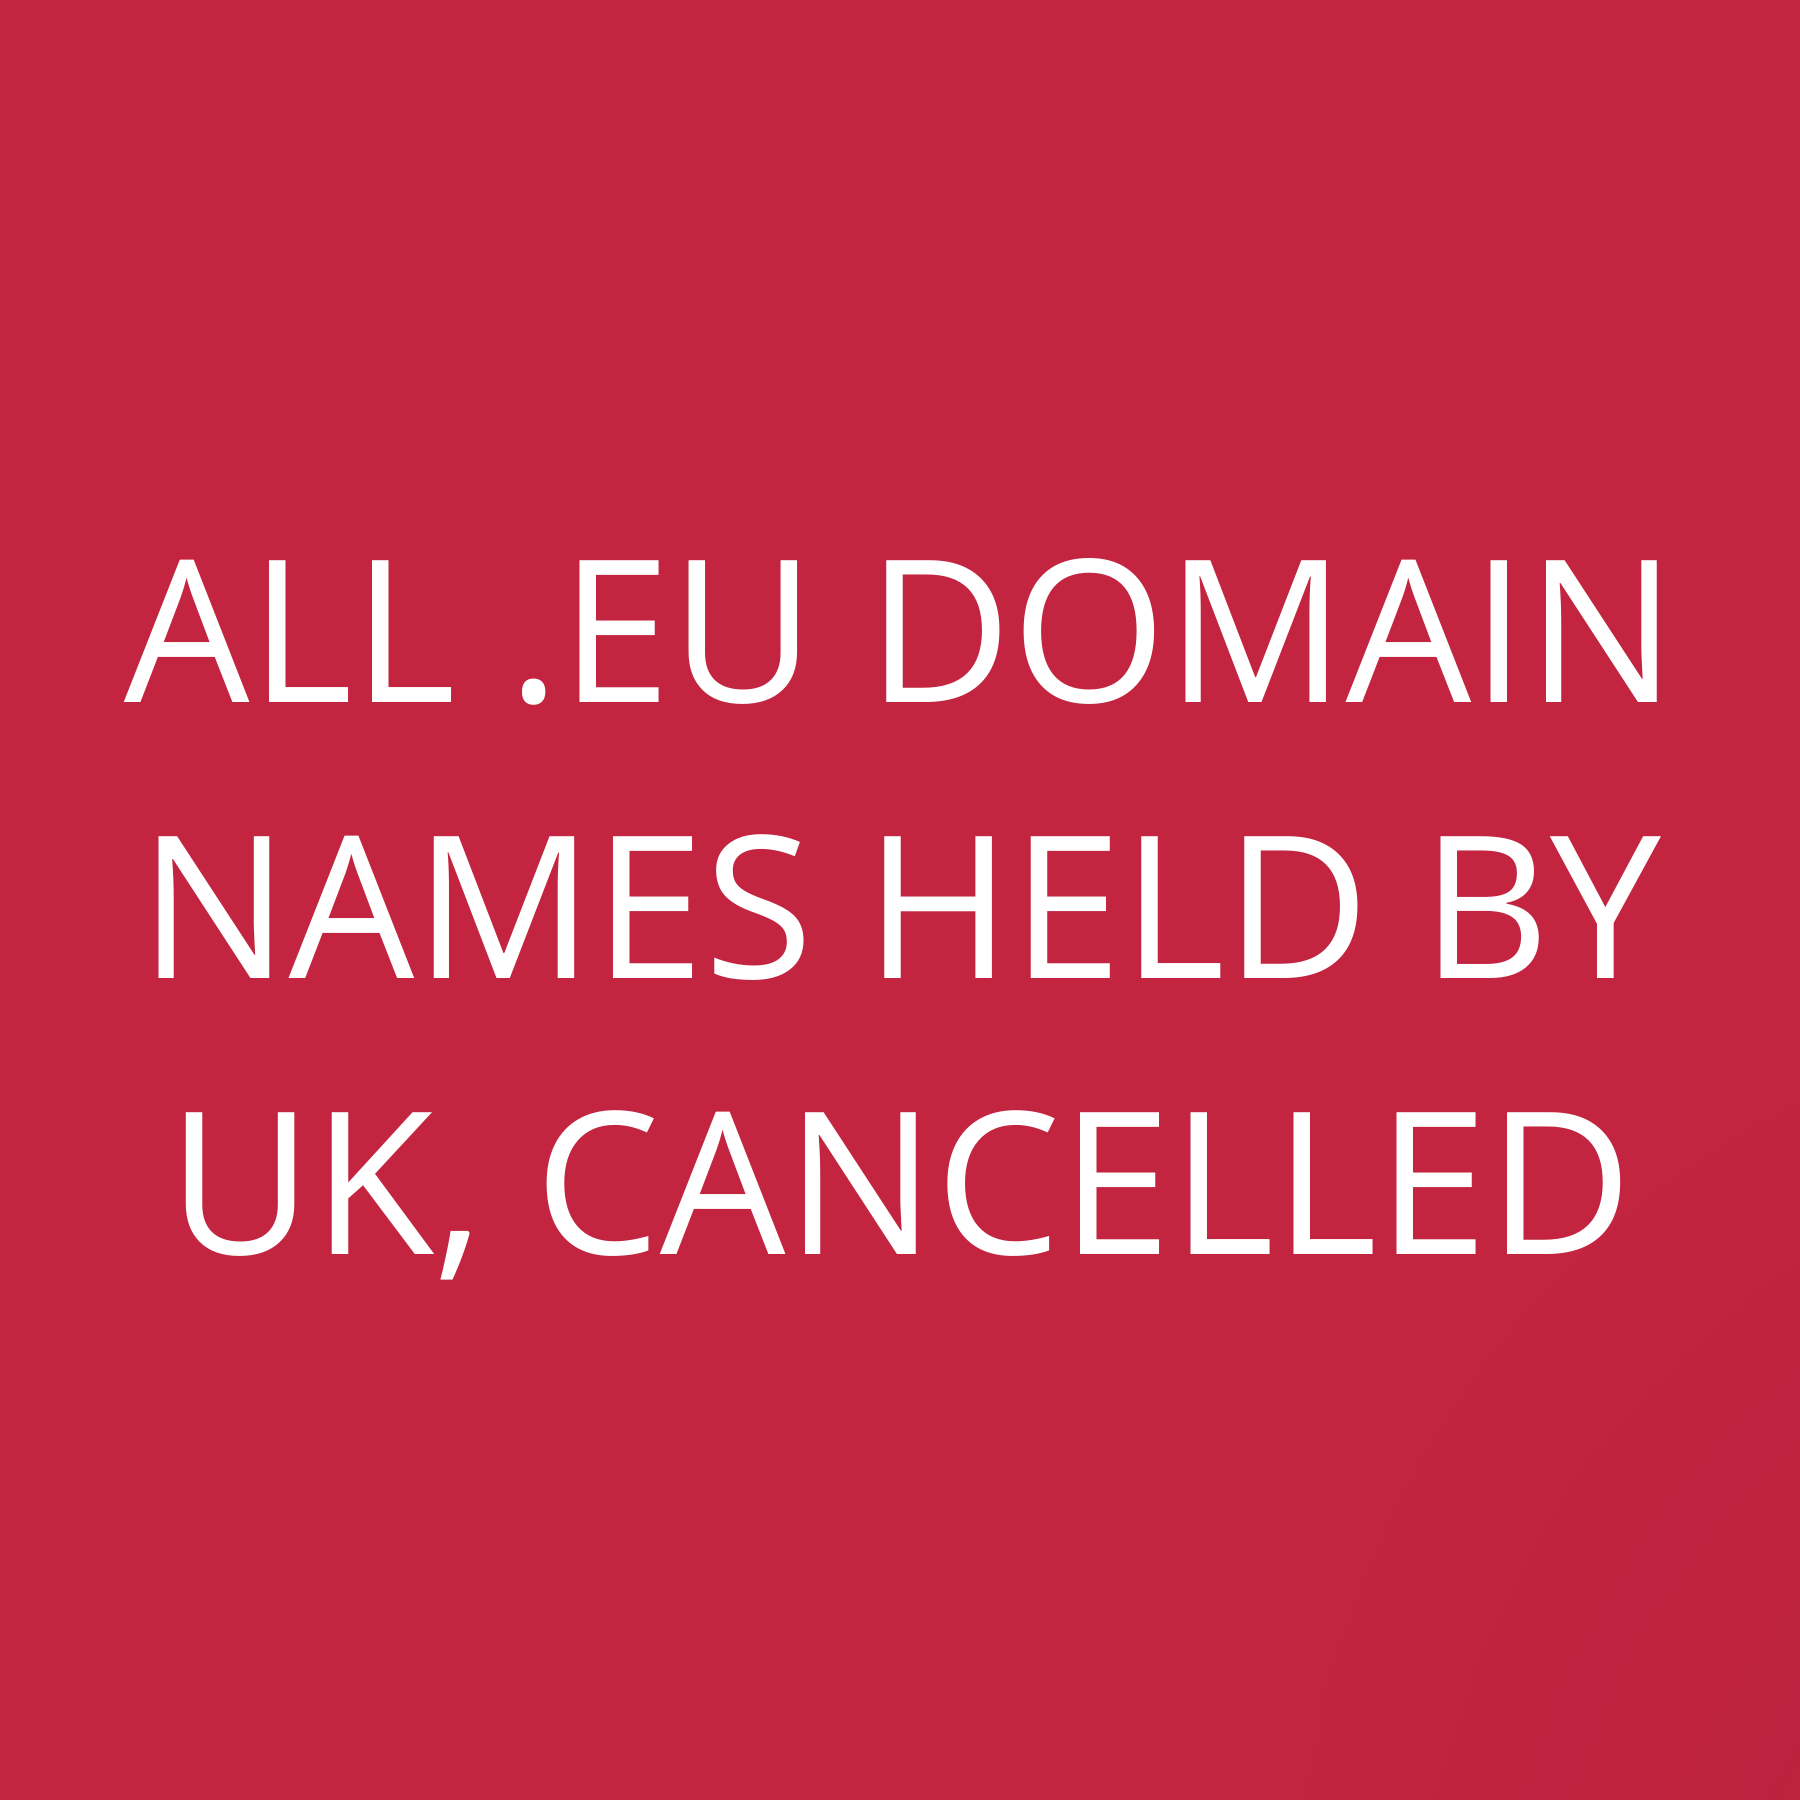 All .eu domain names held by UK, cancelled